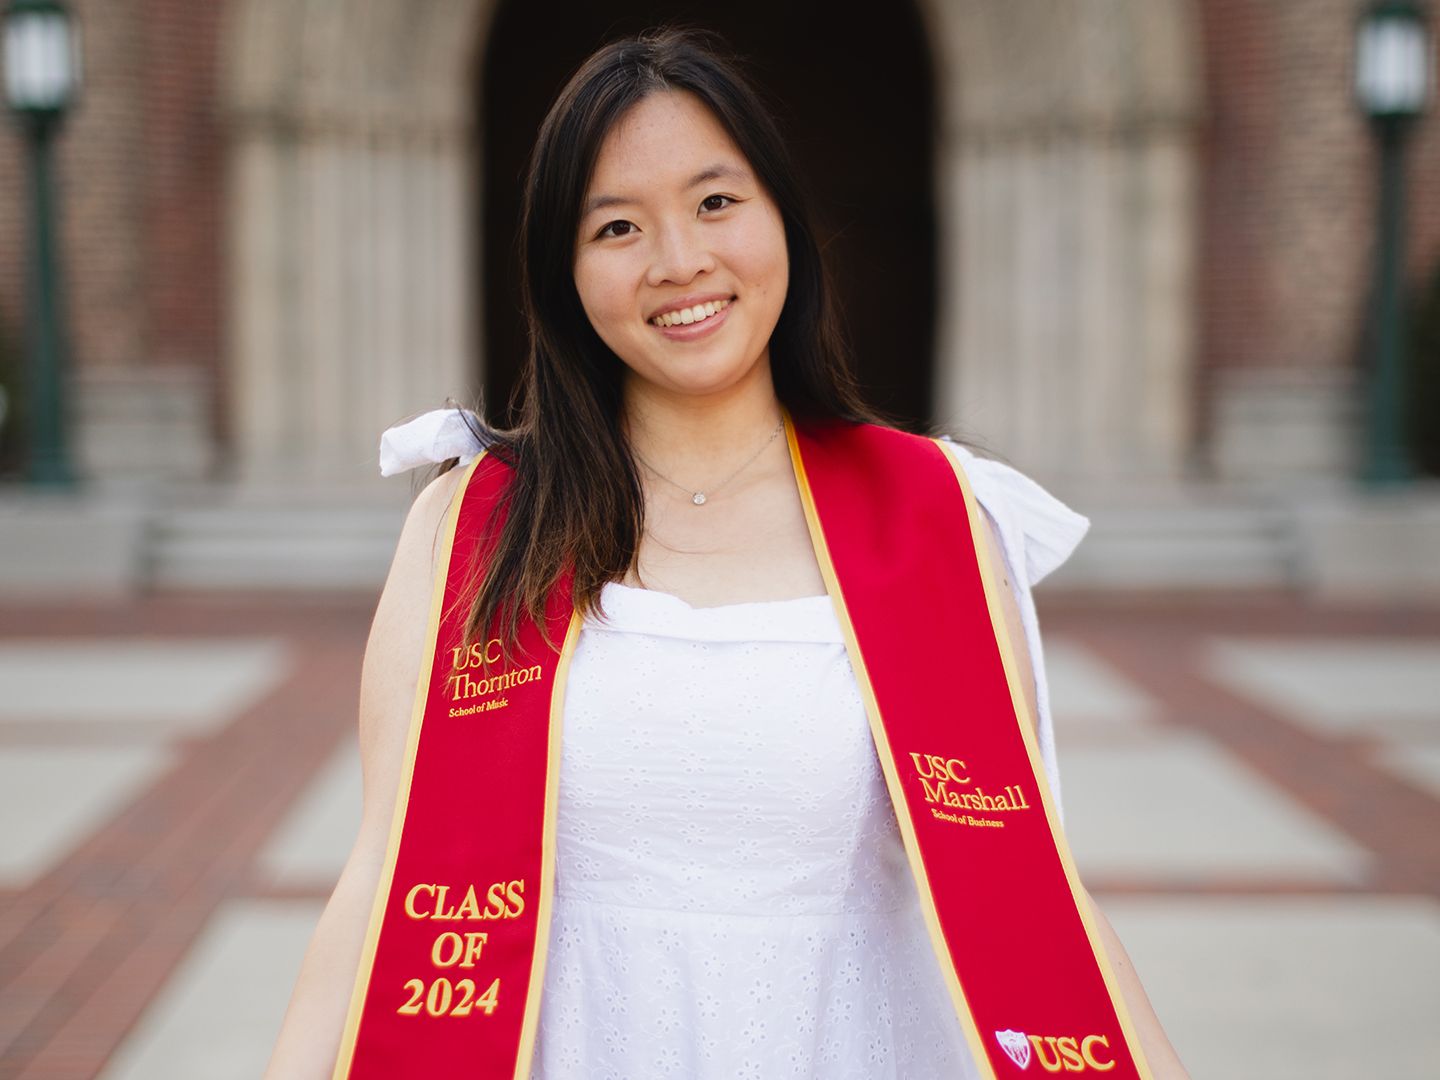 A graduating college student wearing a white dress and a red ceremonial sash smiles at the camera outside a college university. 